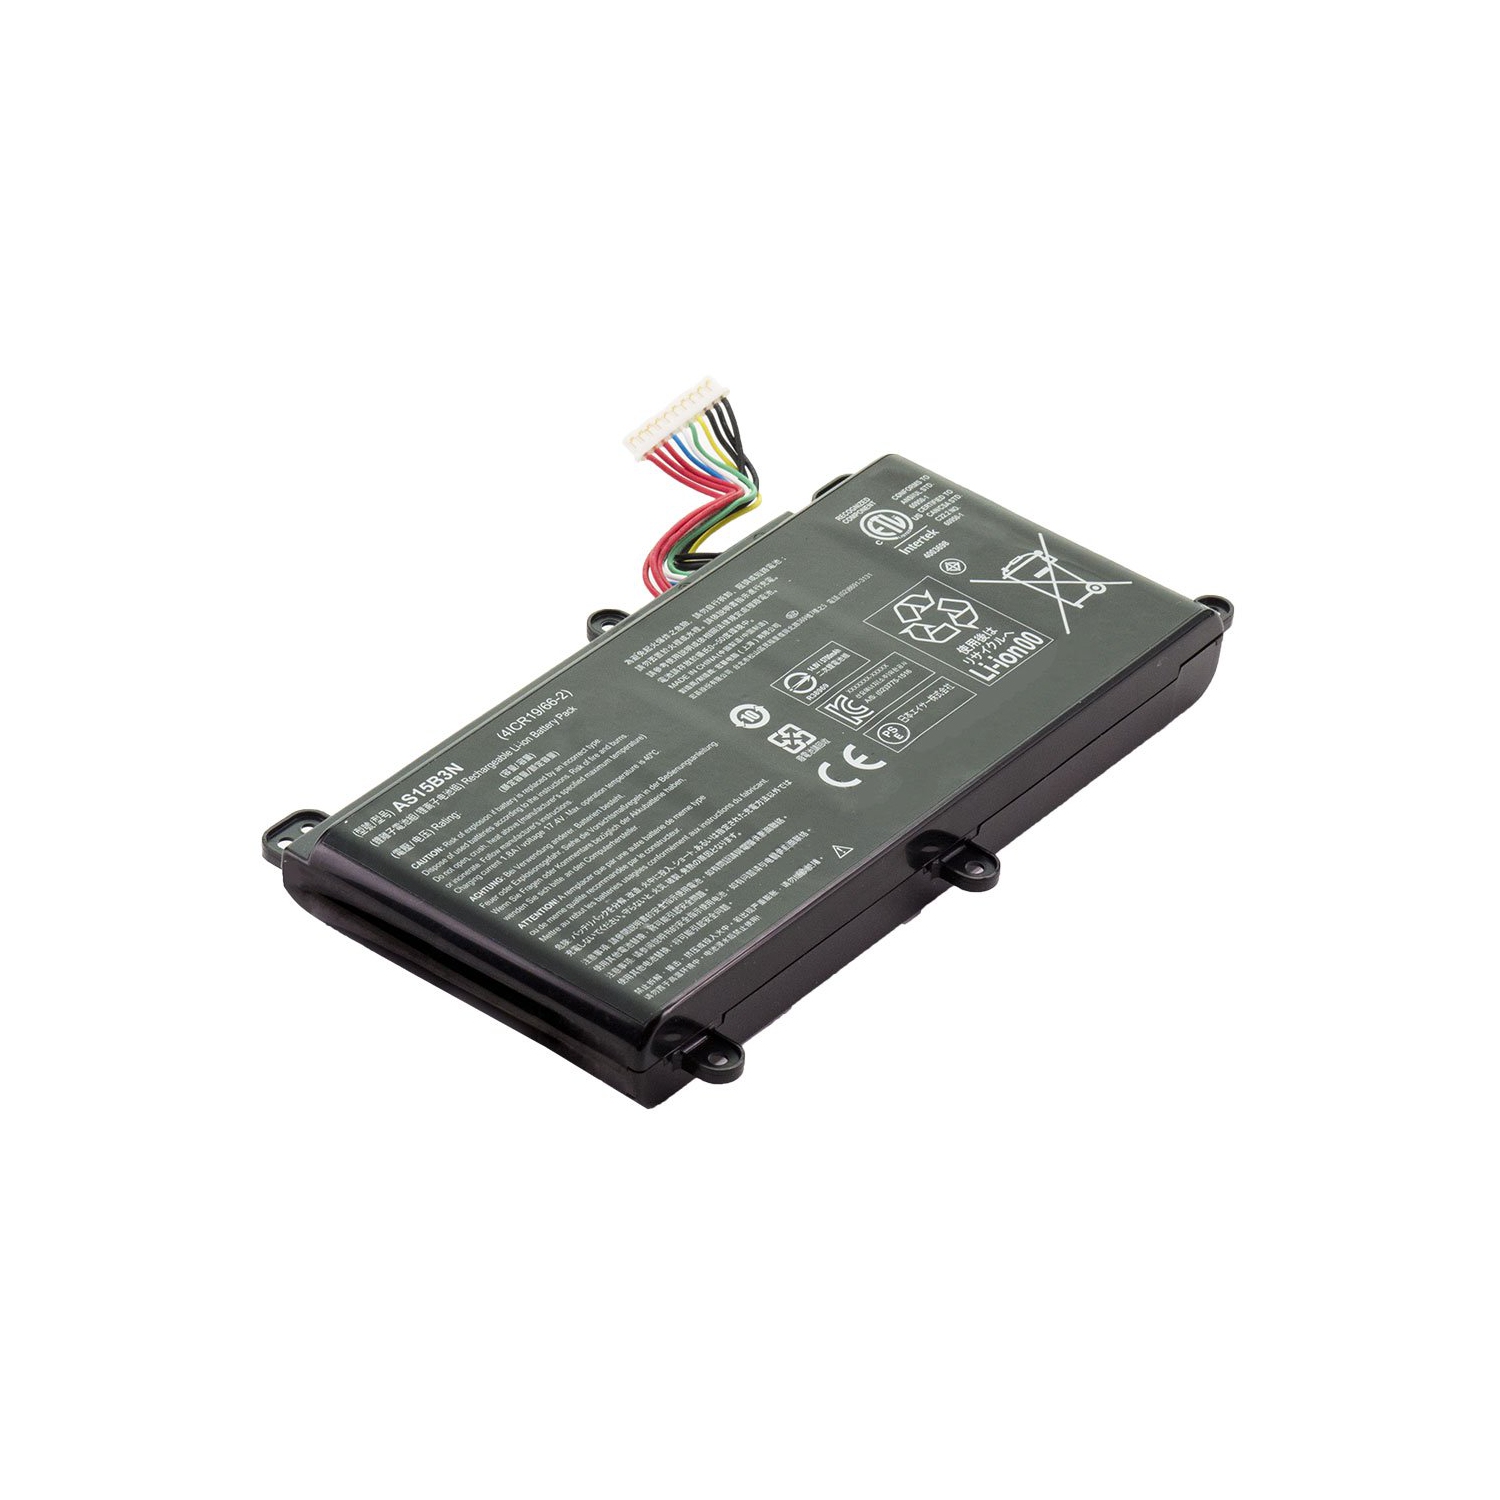 Laptop Battery Replacement for Acer Predator 15 G9-592-73W6, AS15B3N, KT.00803.004, KT.00803.005